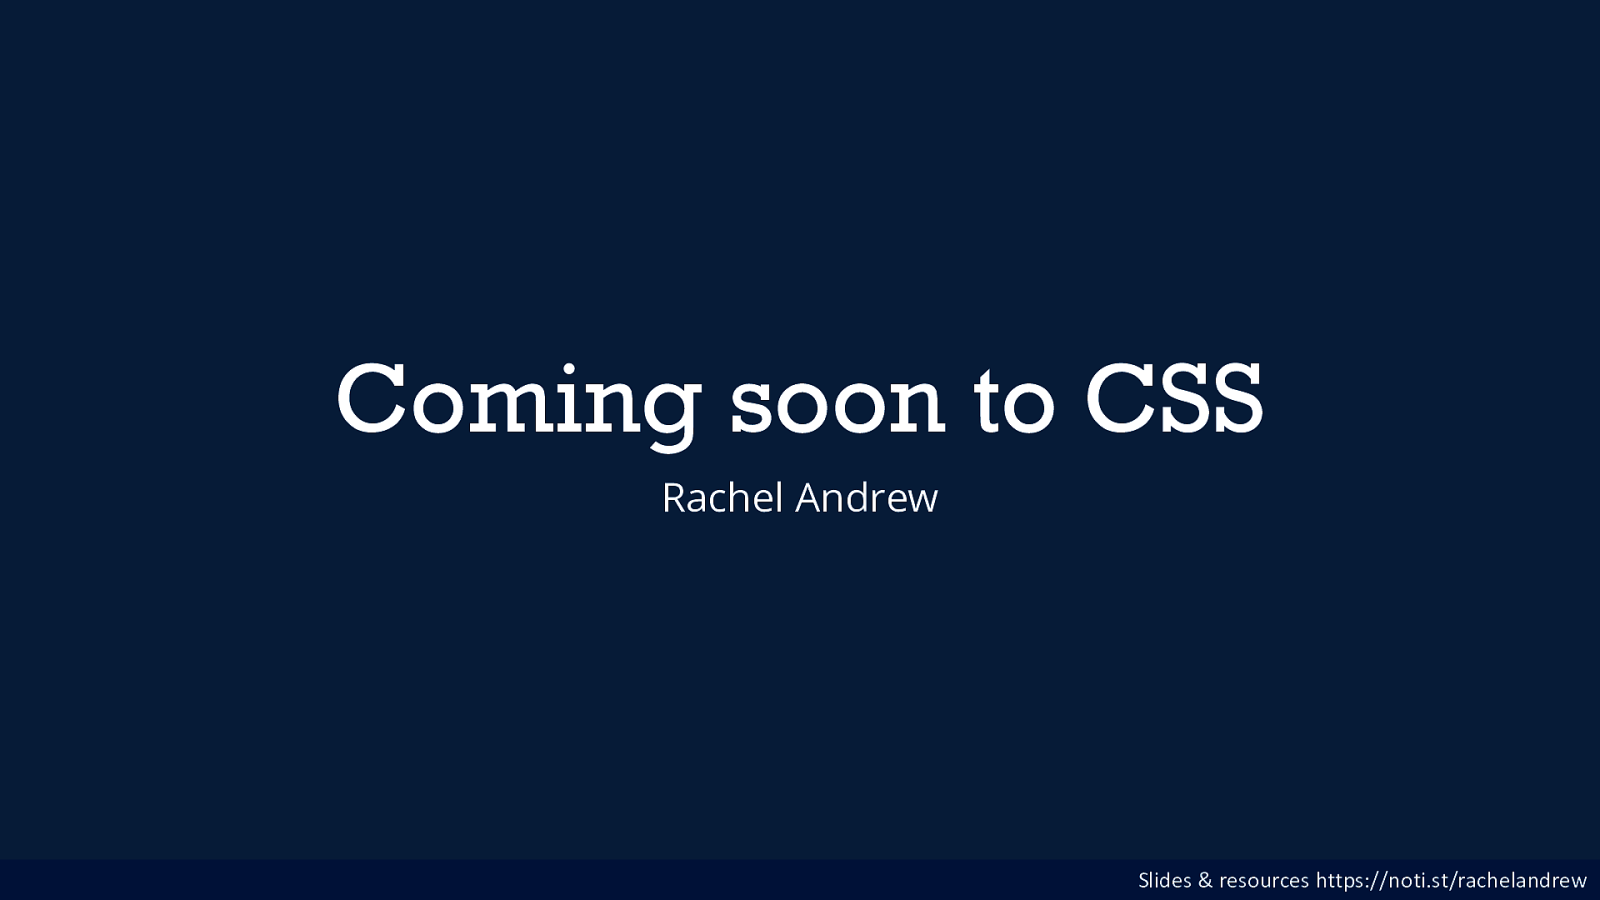 What’s New in CSS